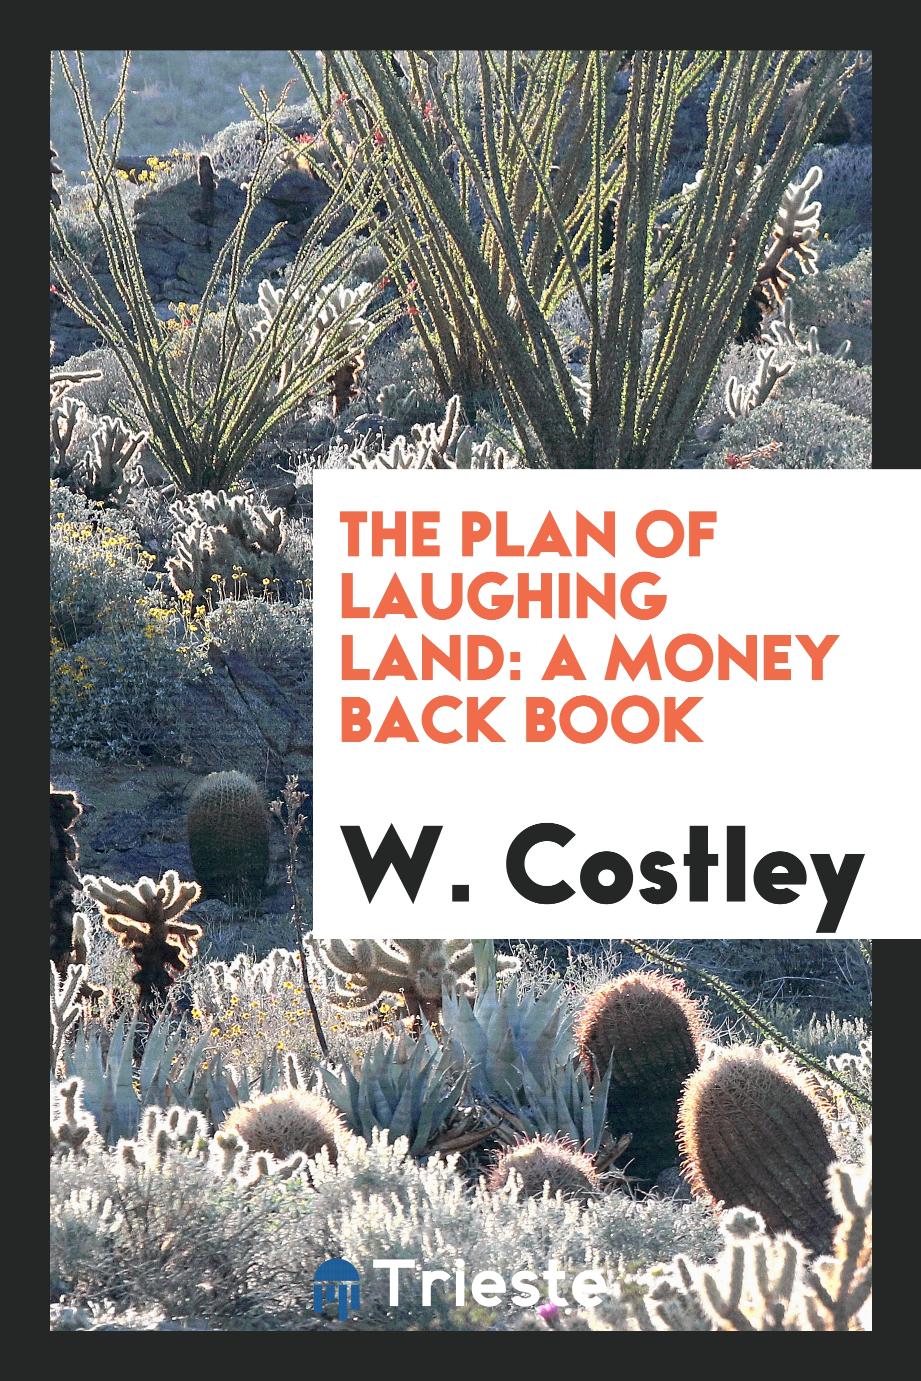 The Plan of Laughing Land: A Money Back Book